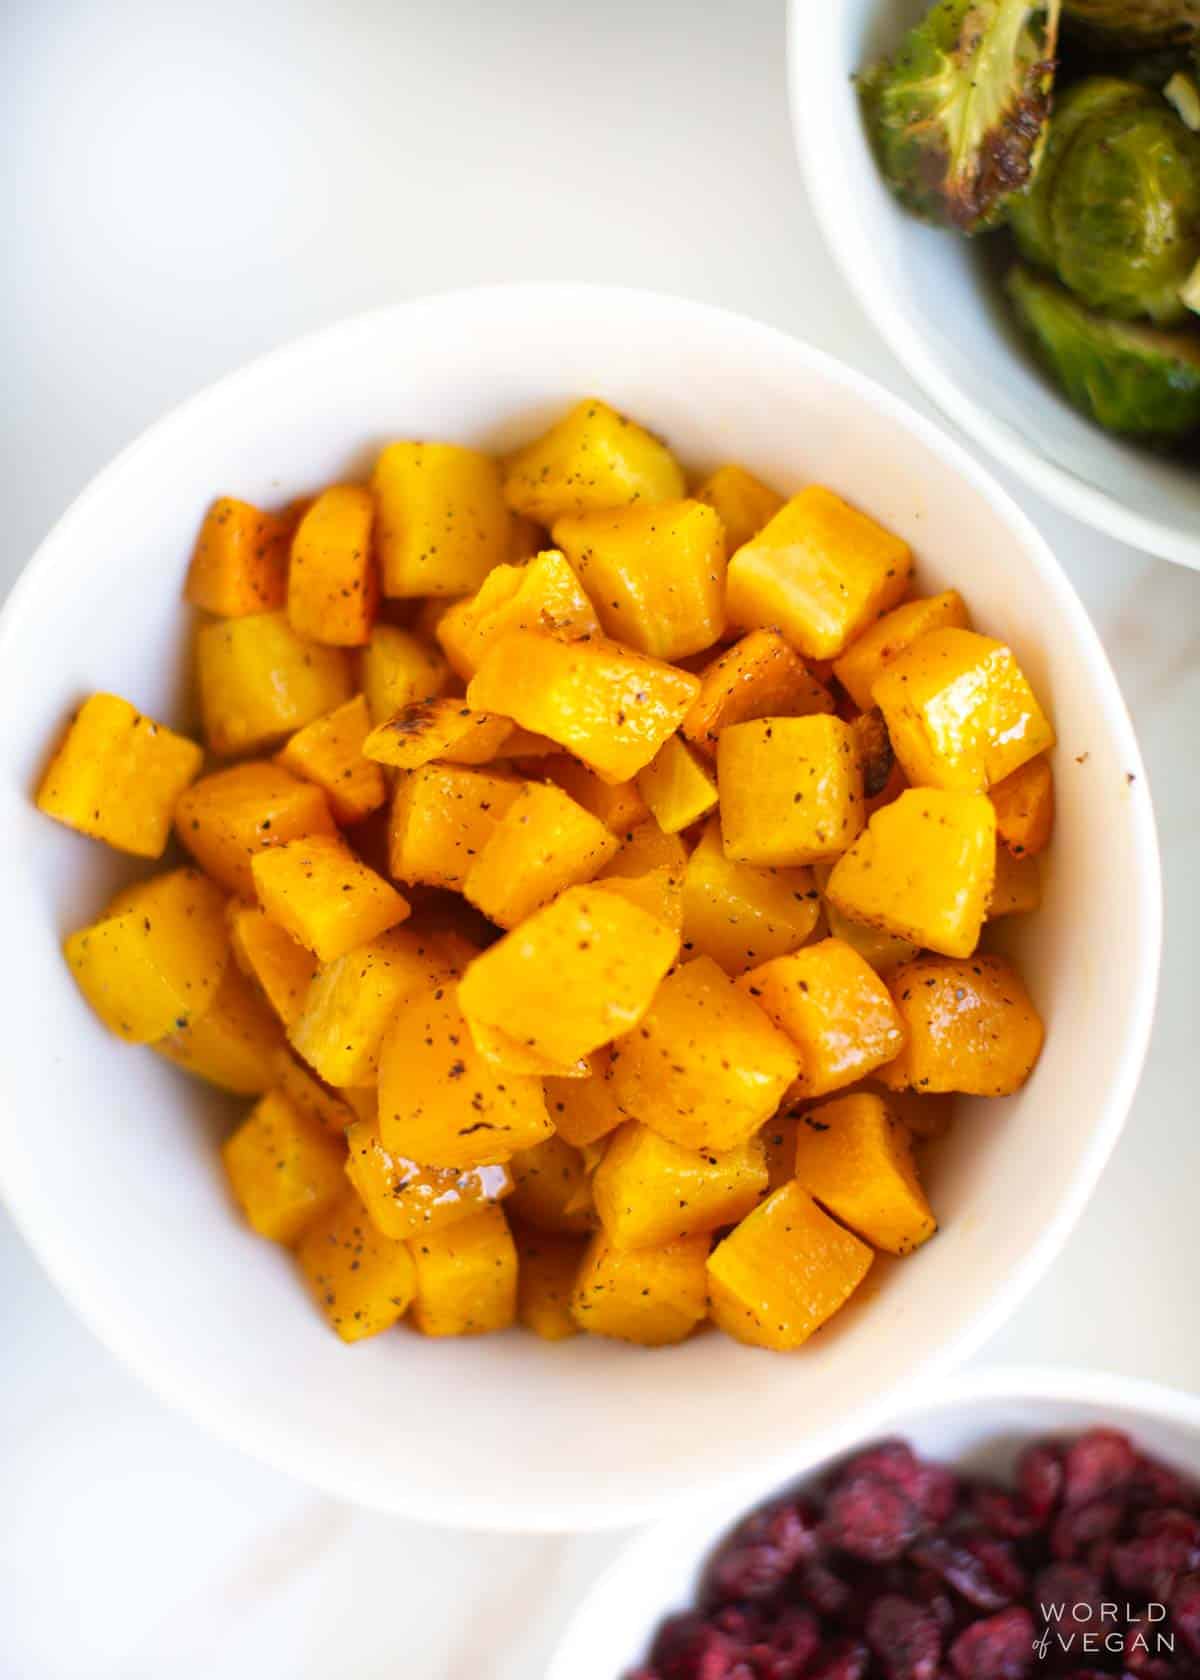 A bowl of chopped, roasted butternut squash.